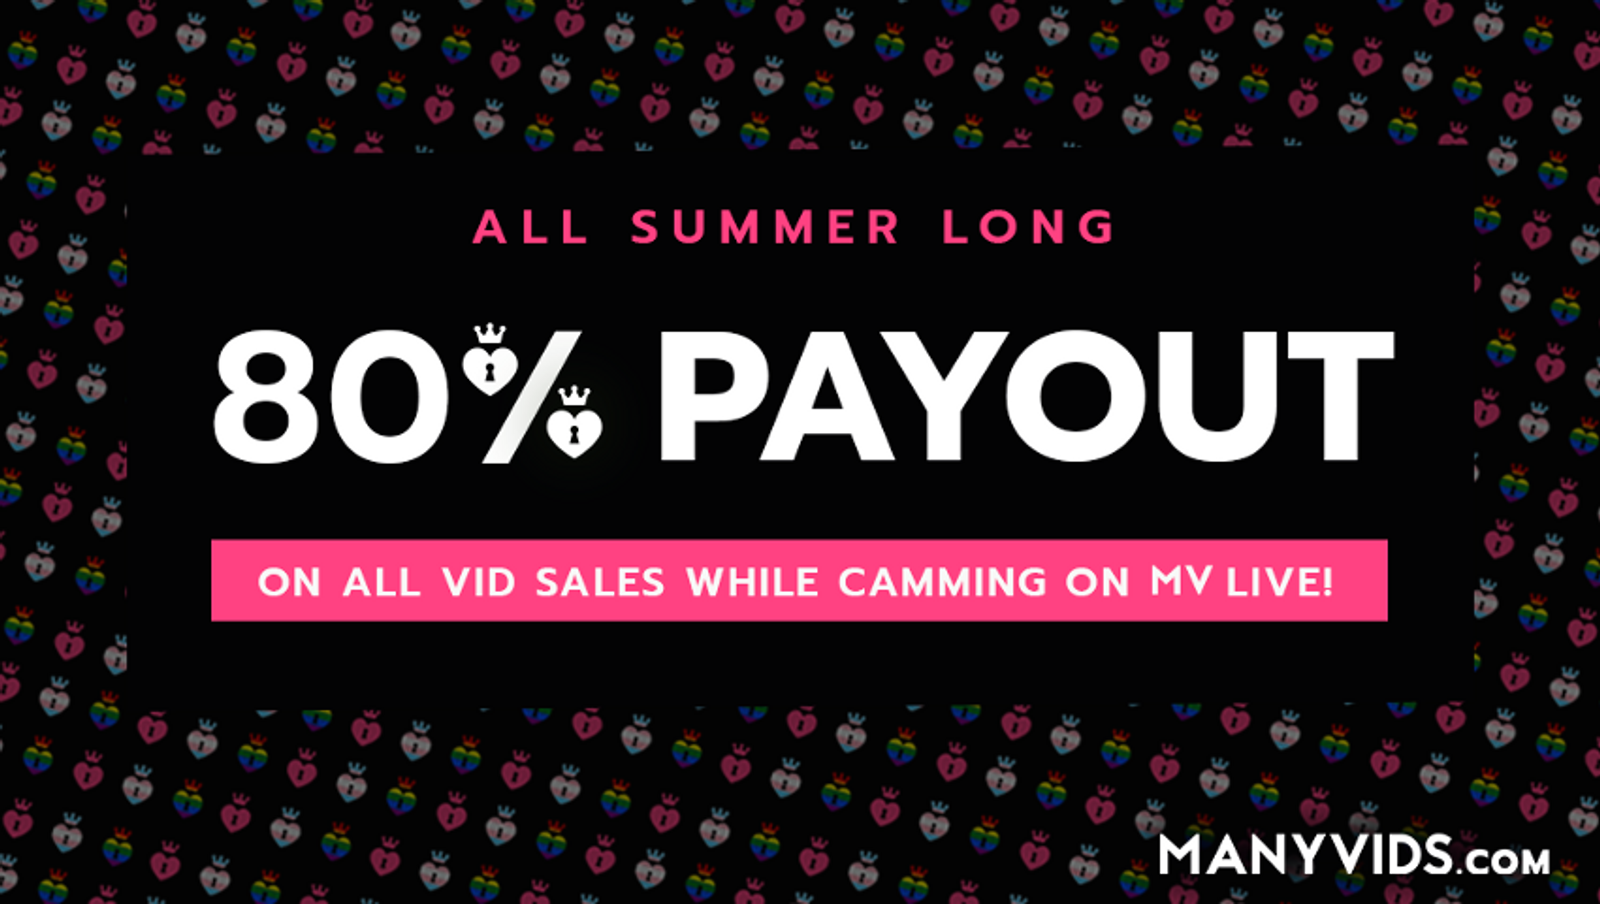 ManyVids Increases Video Sales Payouts on MV Live